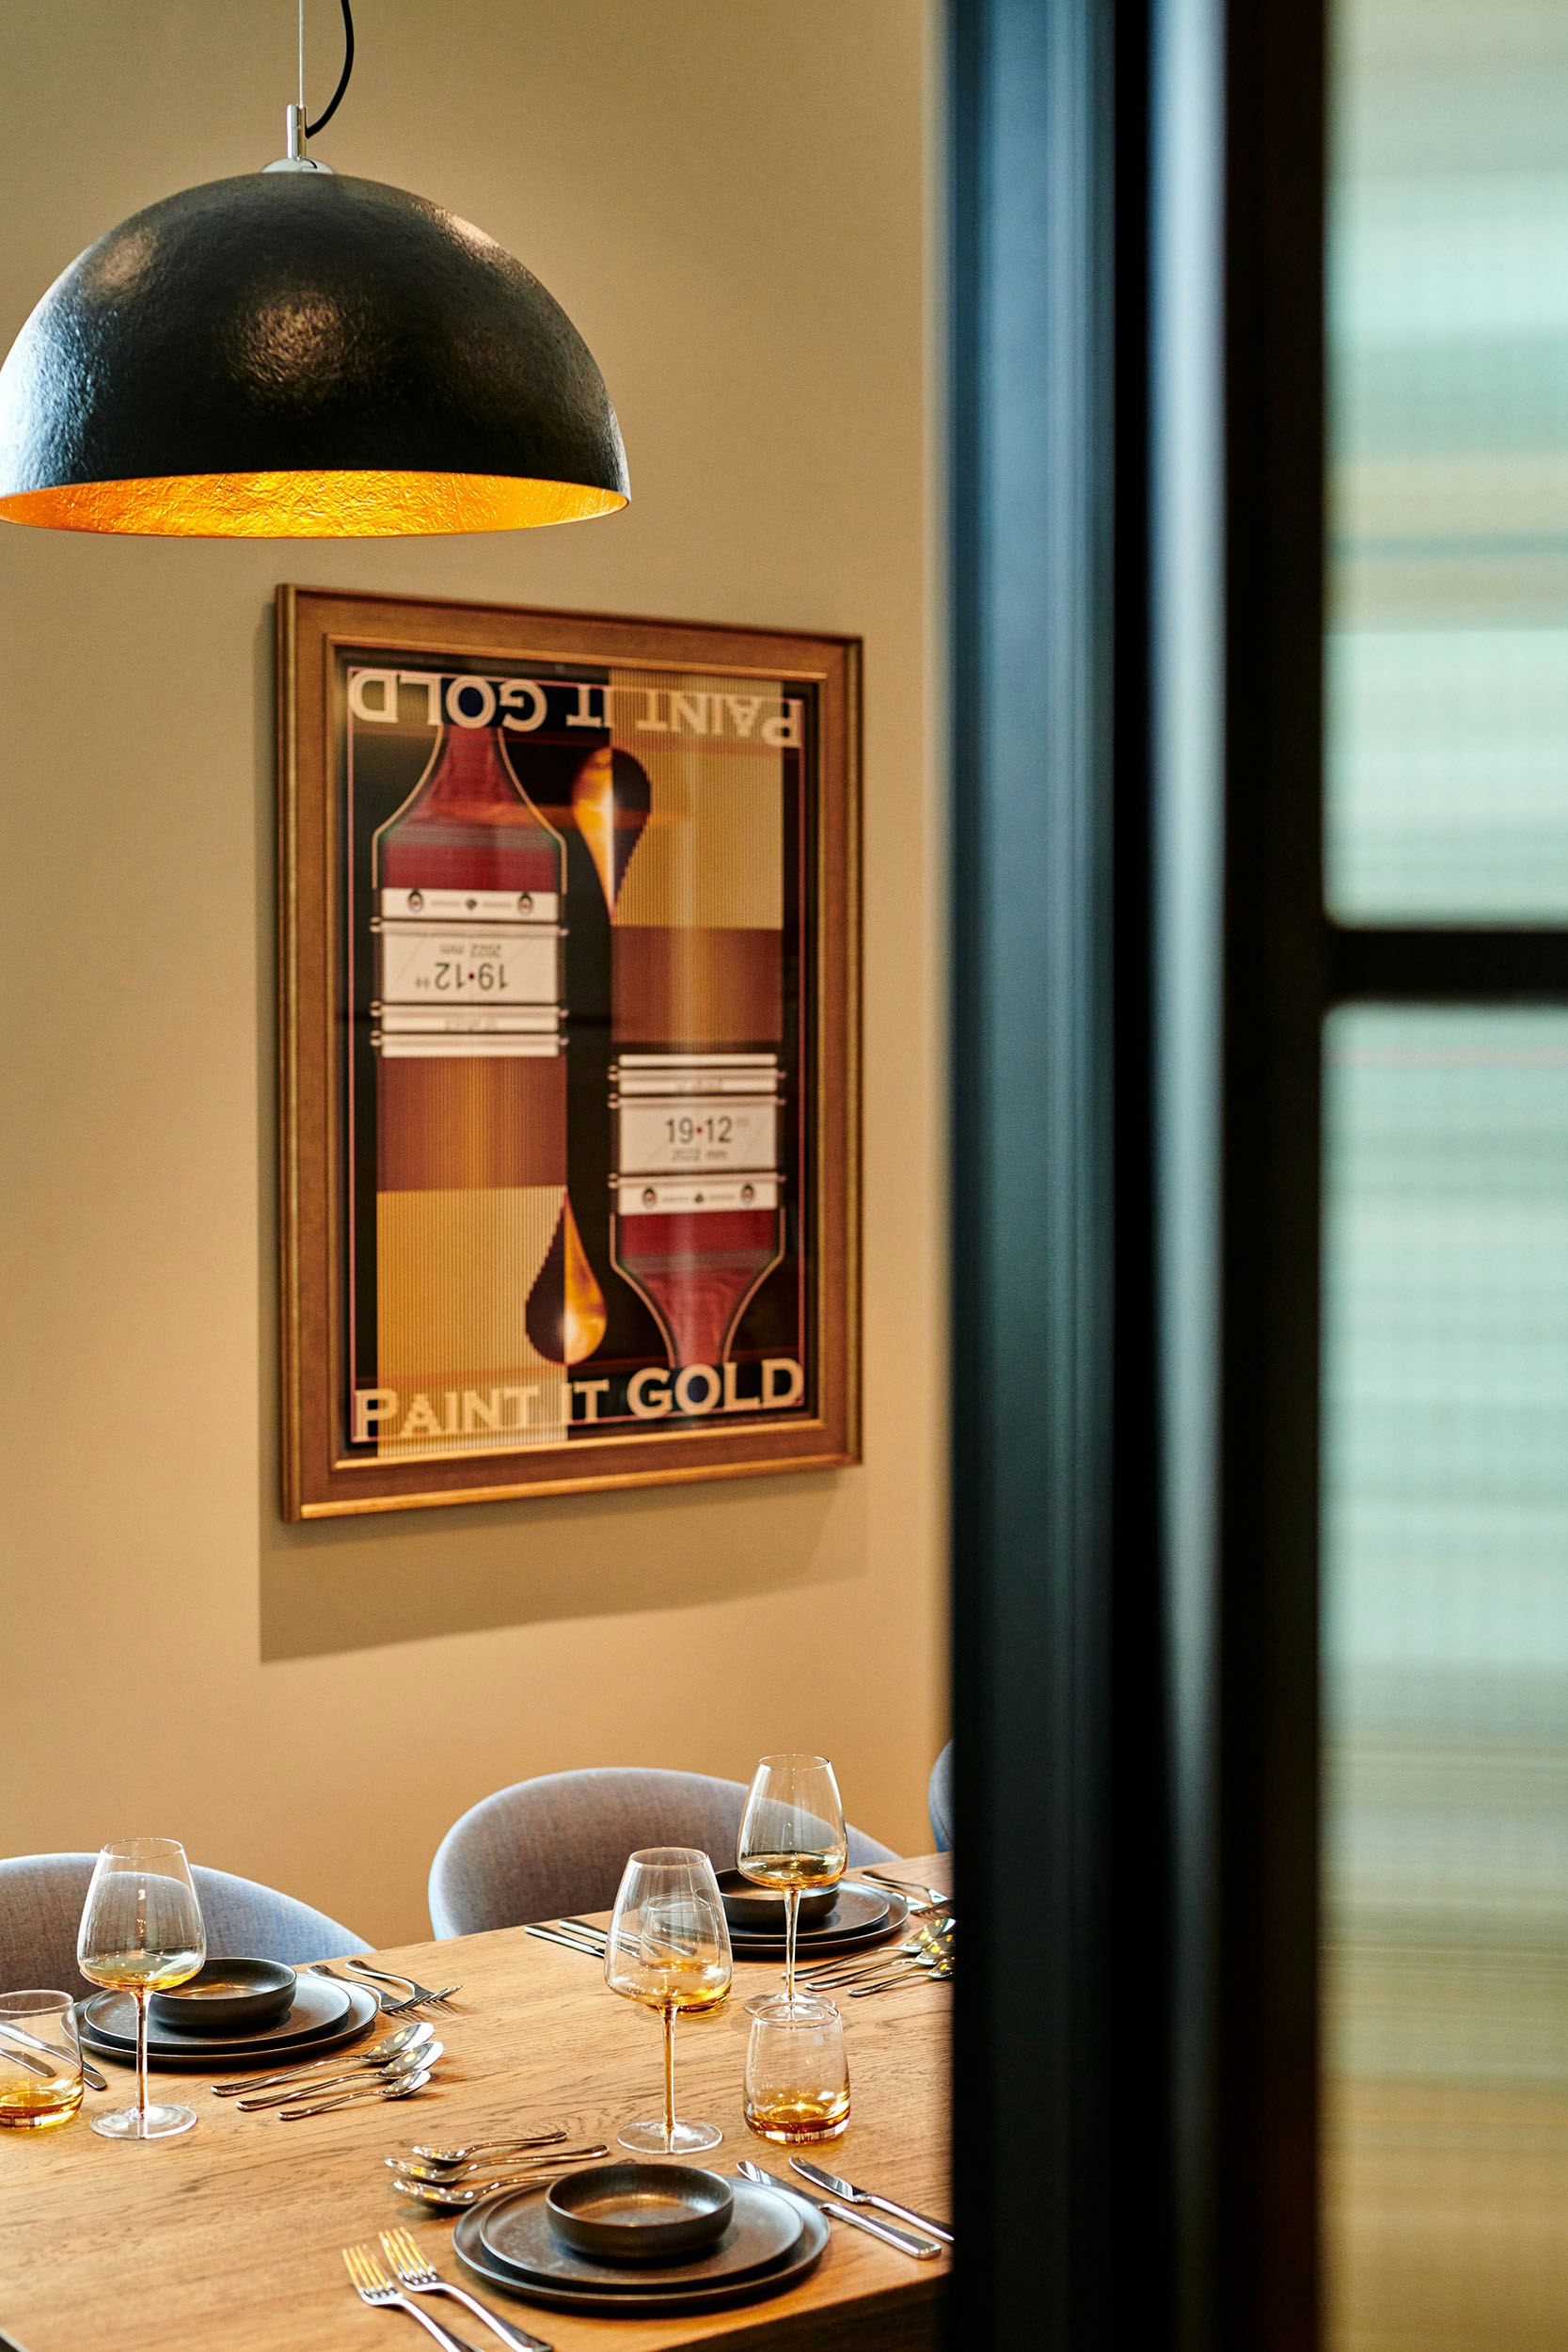 Build to rent artwork - Gilders Yard - Vintage industrial poster design for the private meeting room interior